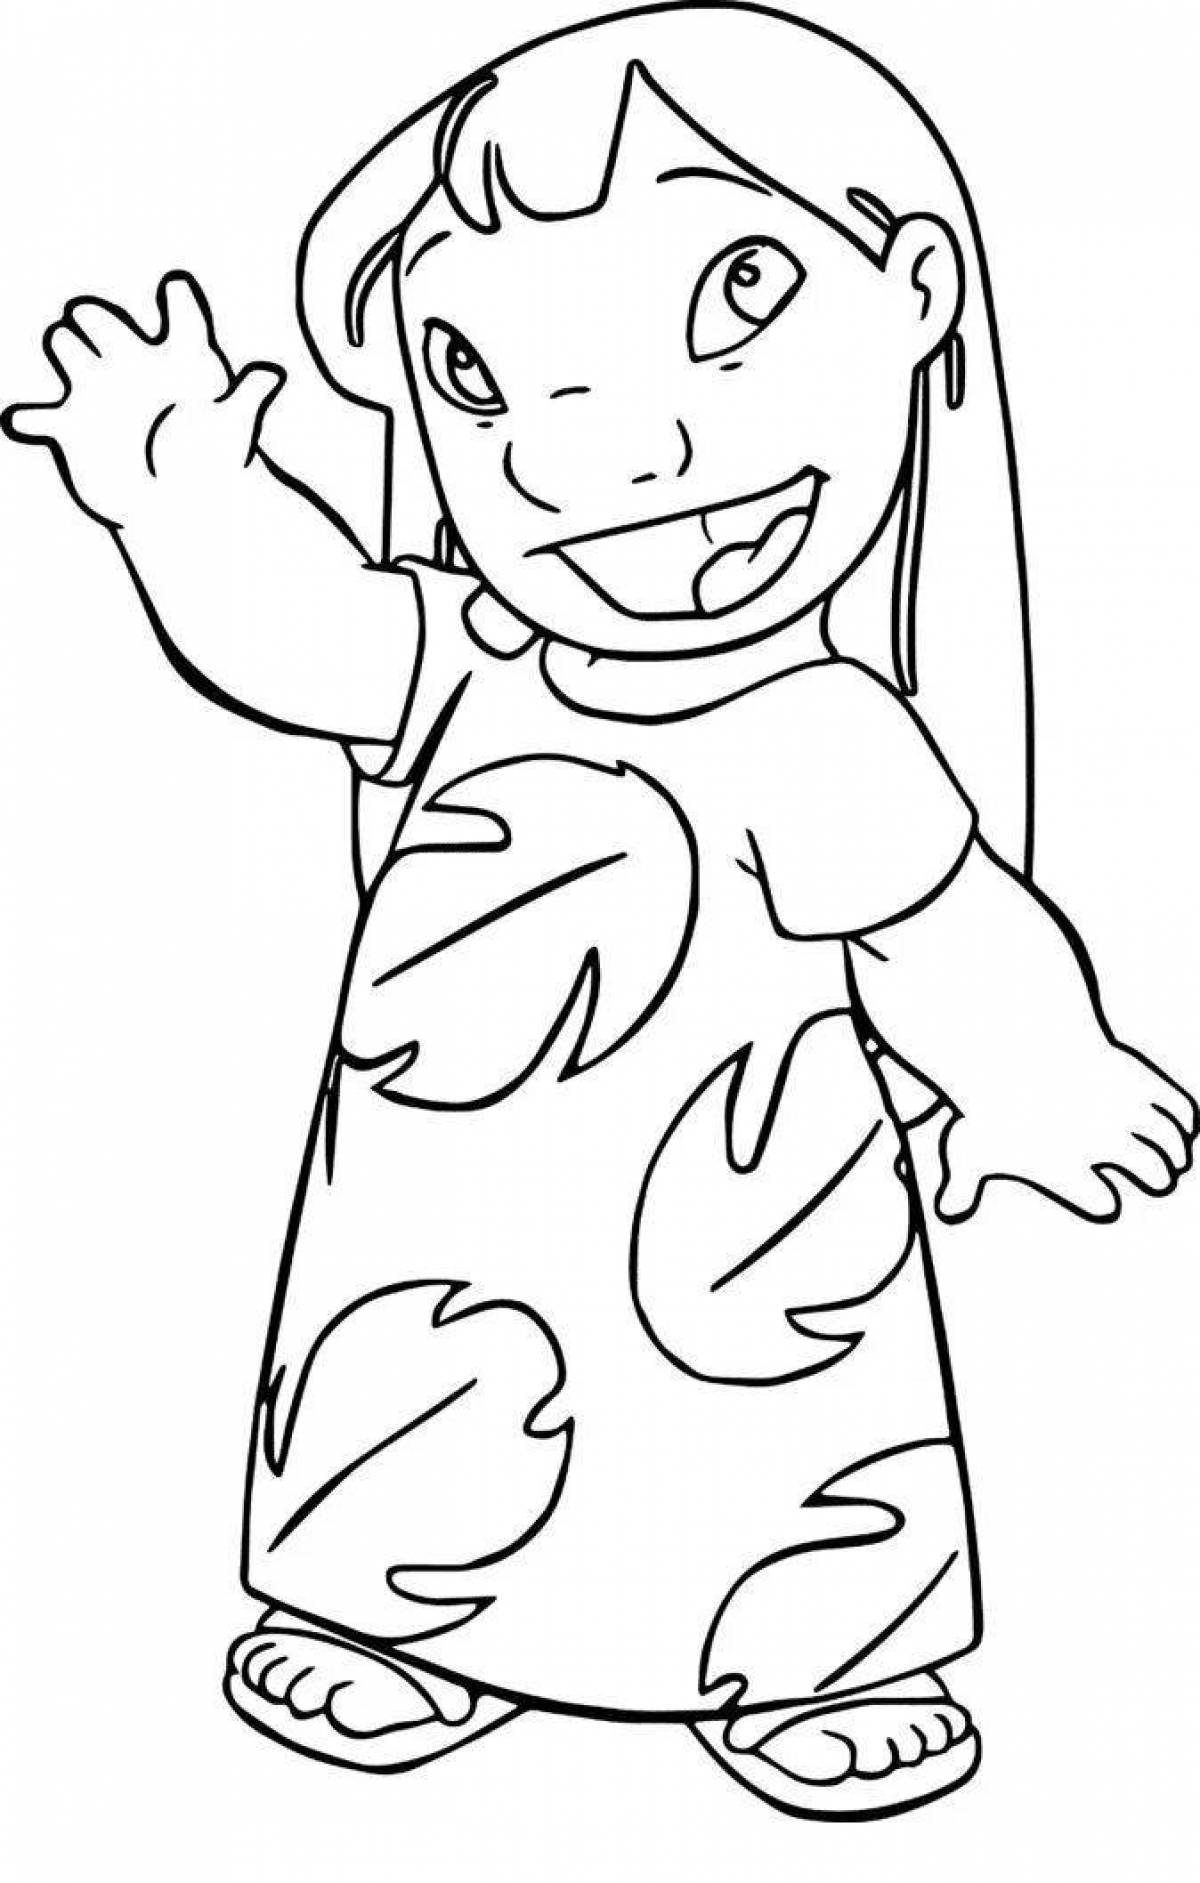 Bliss lily coloring page